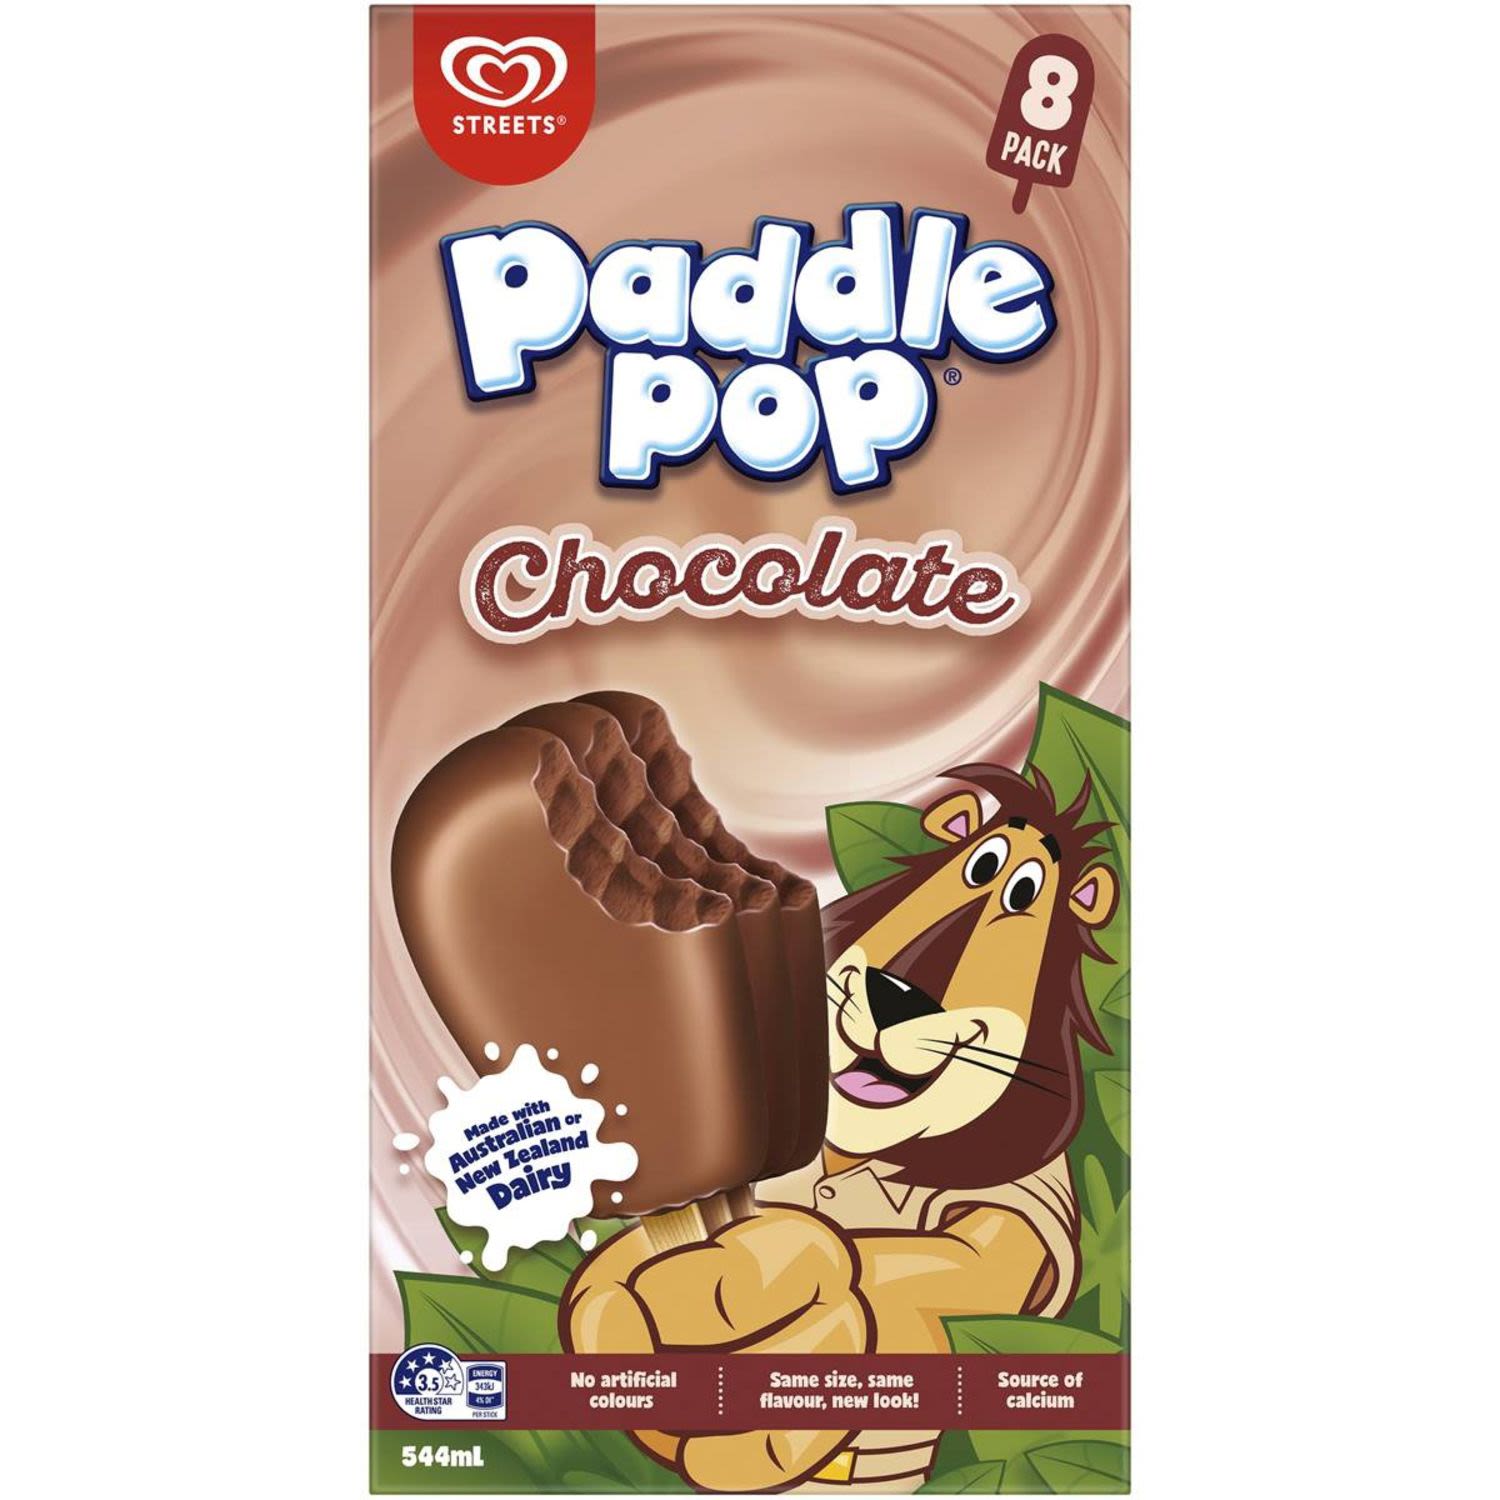 Streets Paddle Pop Chocolate 8 pack